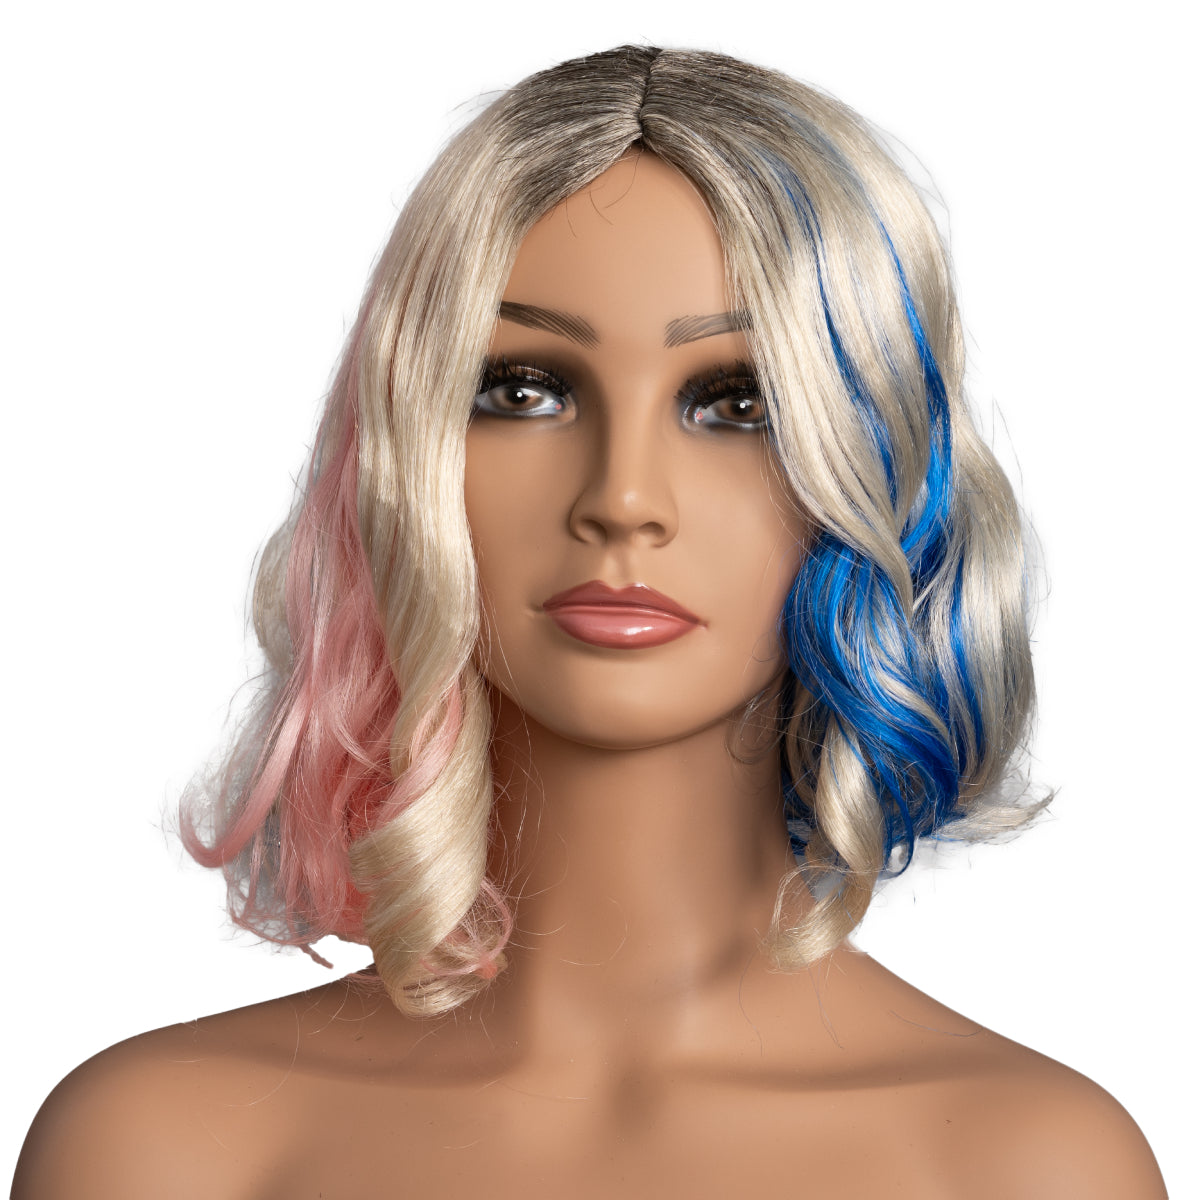 Enid Sinclair Netflix Wednesday TV Show costume Wig Front View